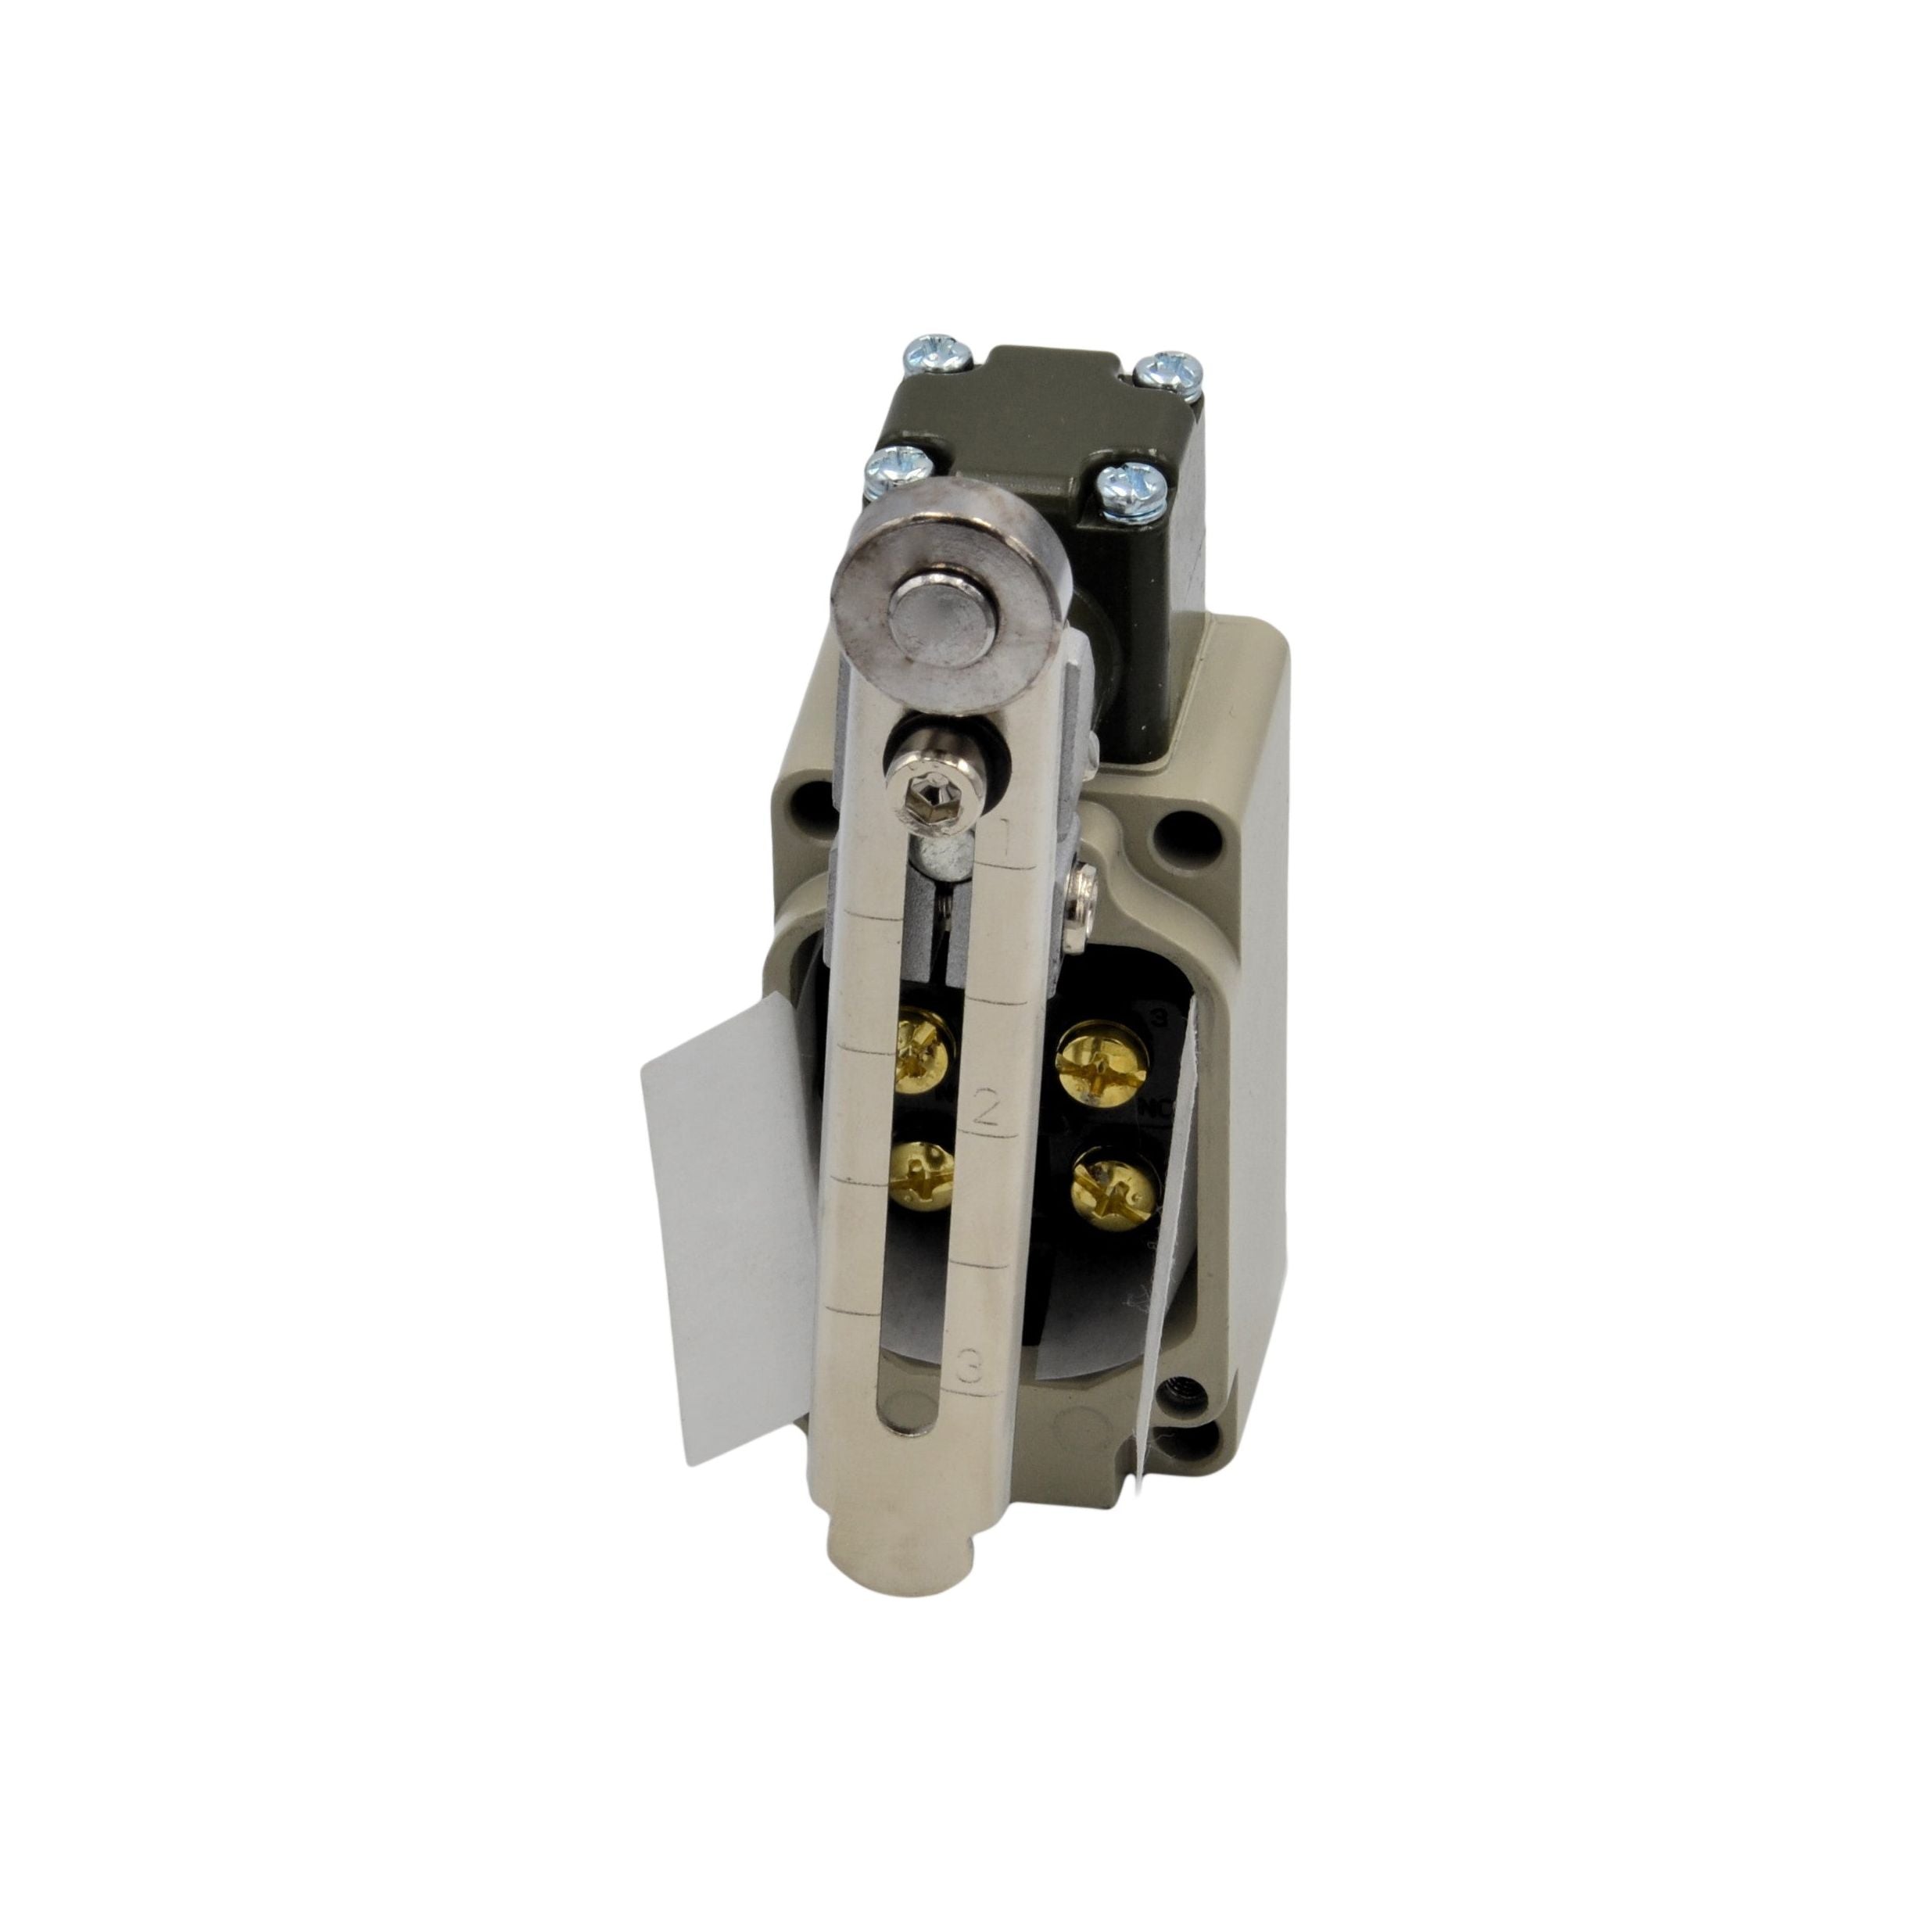 WLCA12-2-Q MicroLimit Switch with Adjustable Roller Arm